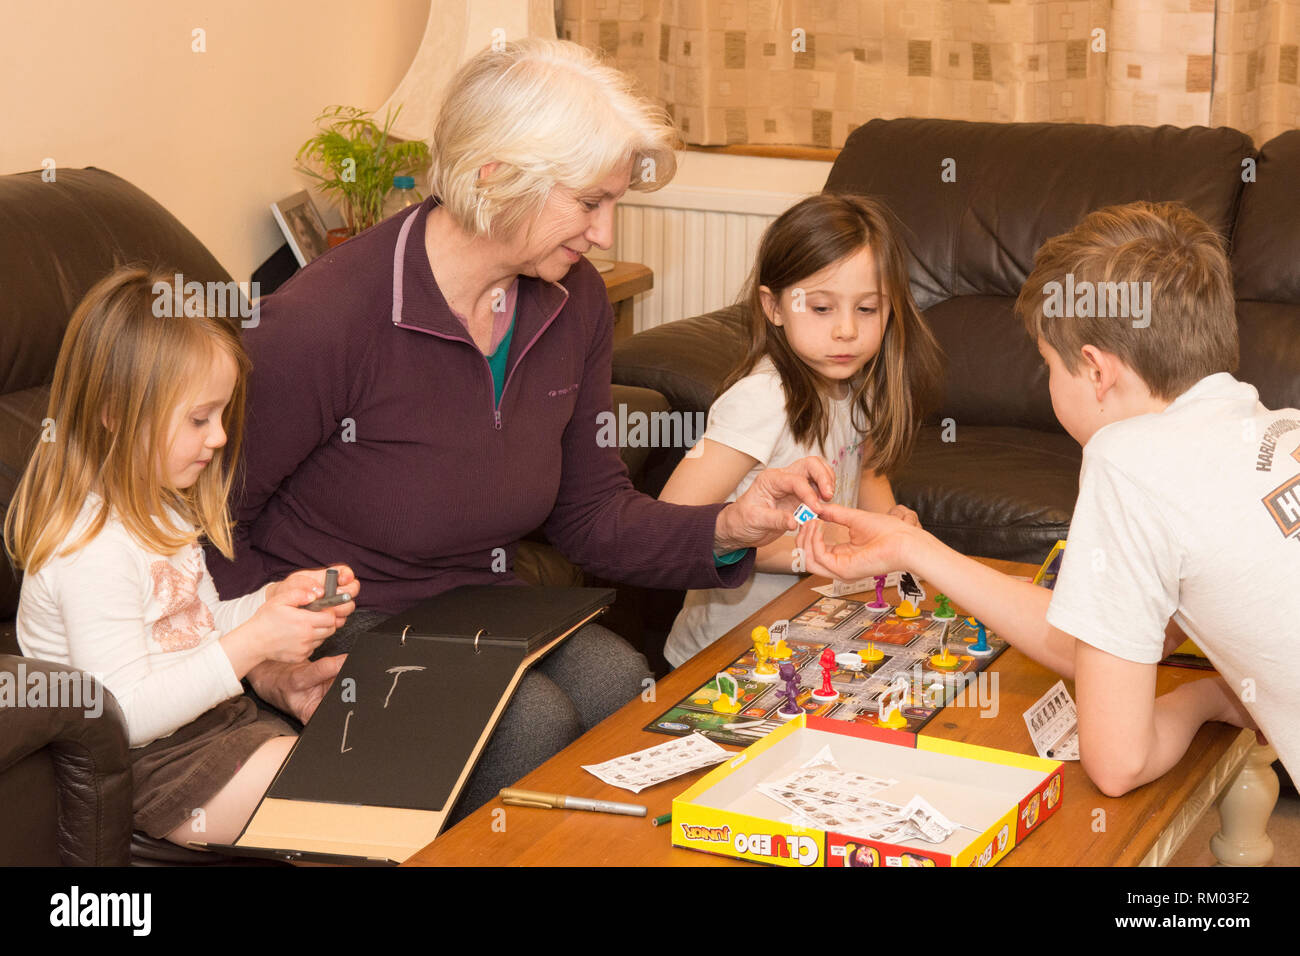 grandmother, granny, playing board game with three grandchildren, aged two to twelve, two girls, one boy. Stock Photo